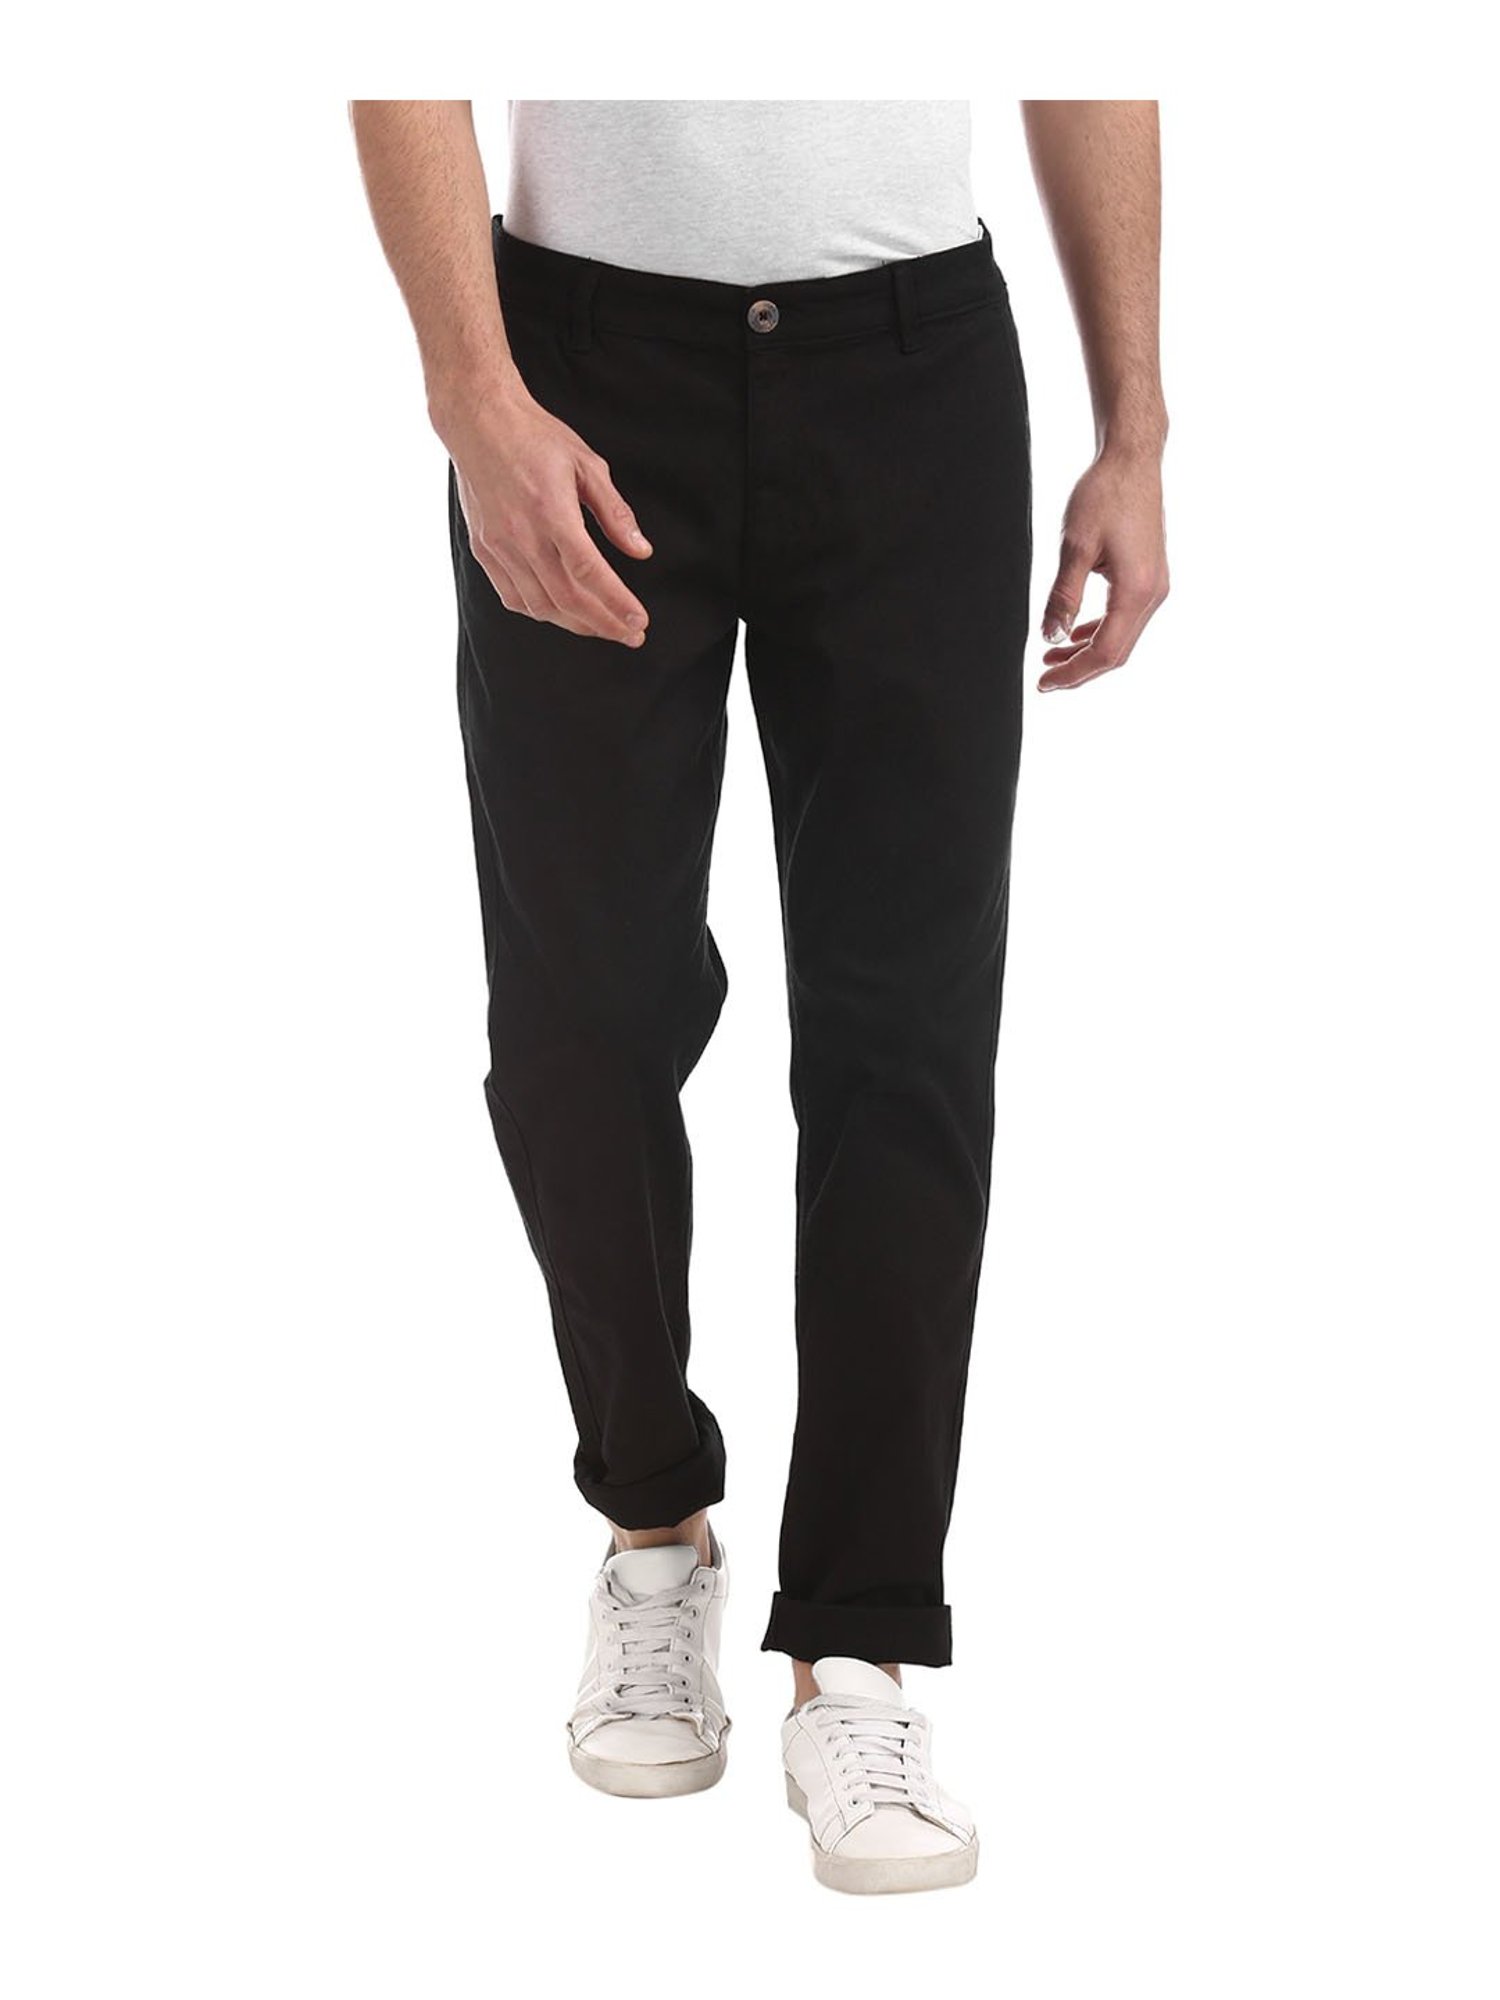 32% OFF on Ruggers Men's Slim Fit Casual Trousers on Amazon | PaisaWapas.com